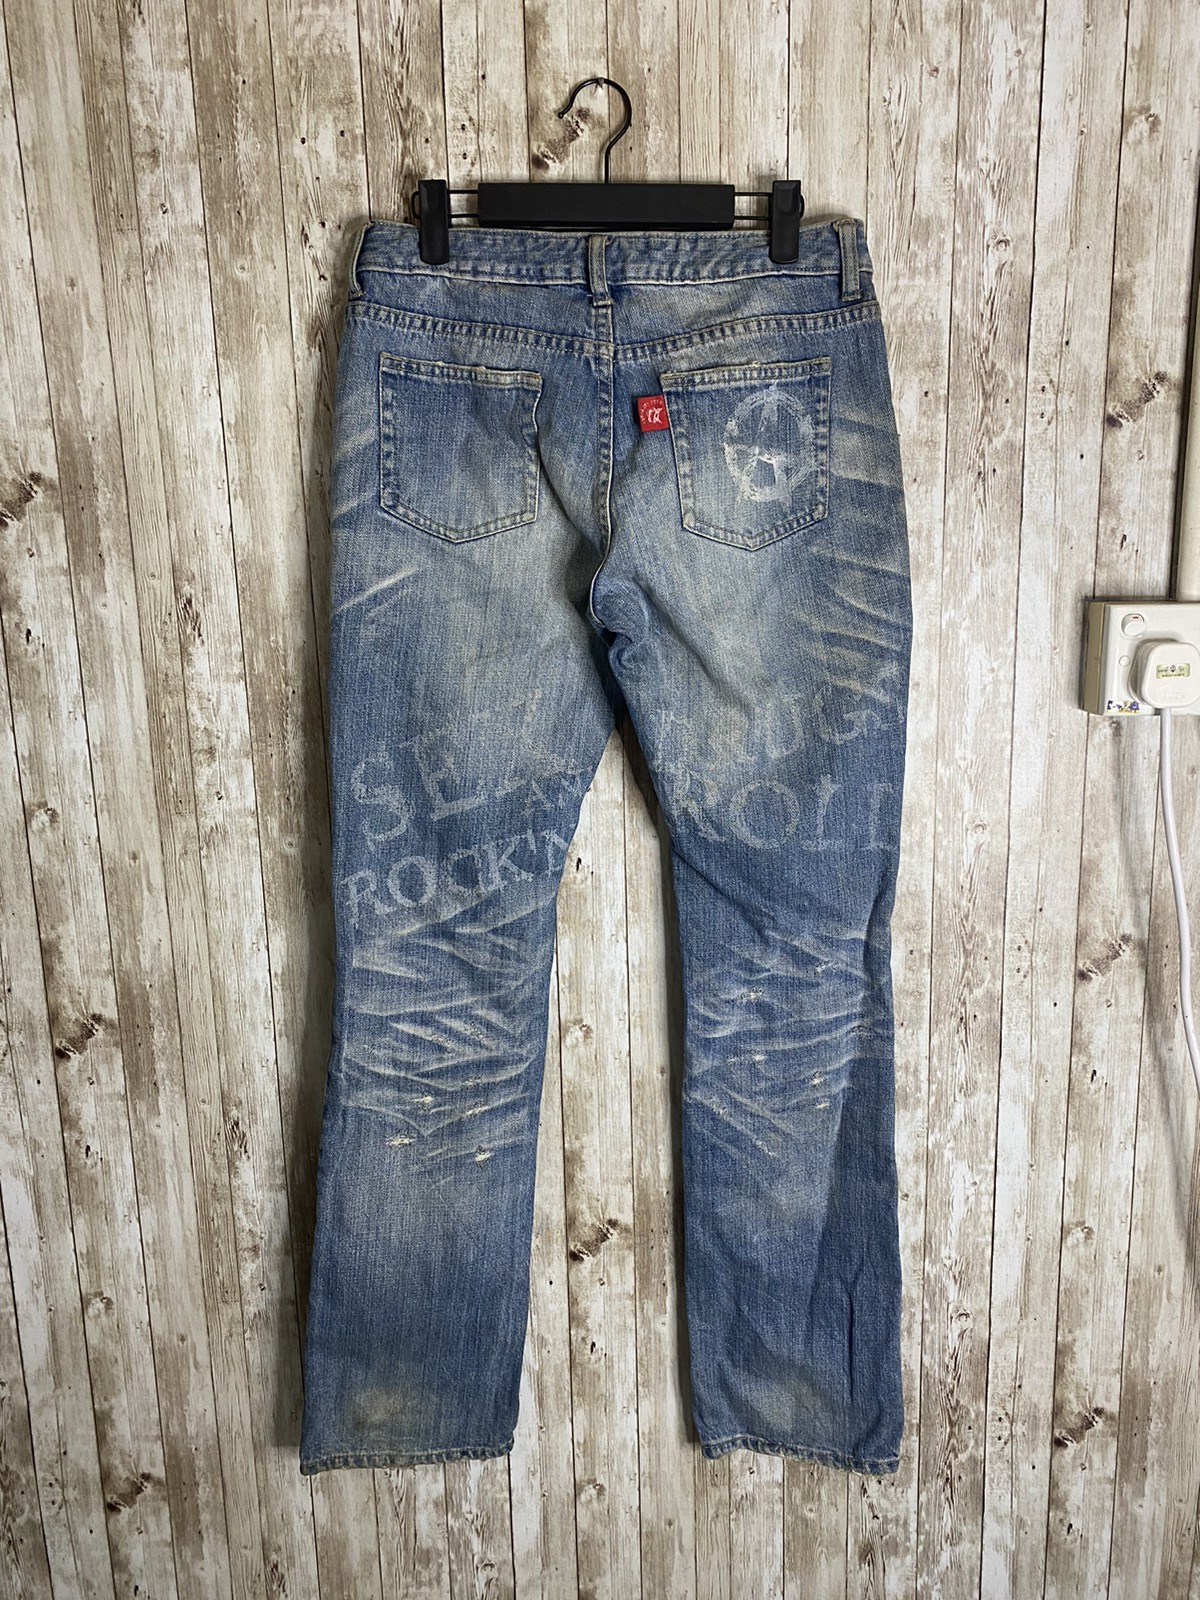 Japanese Brand - Seditionaries Hell Cat Punks Jeans - 2